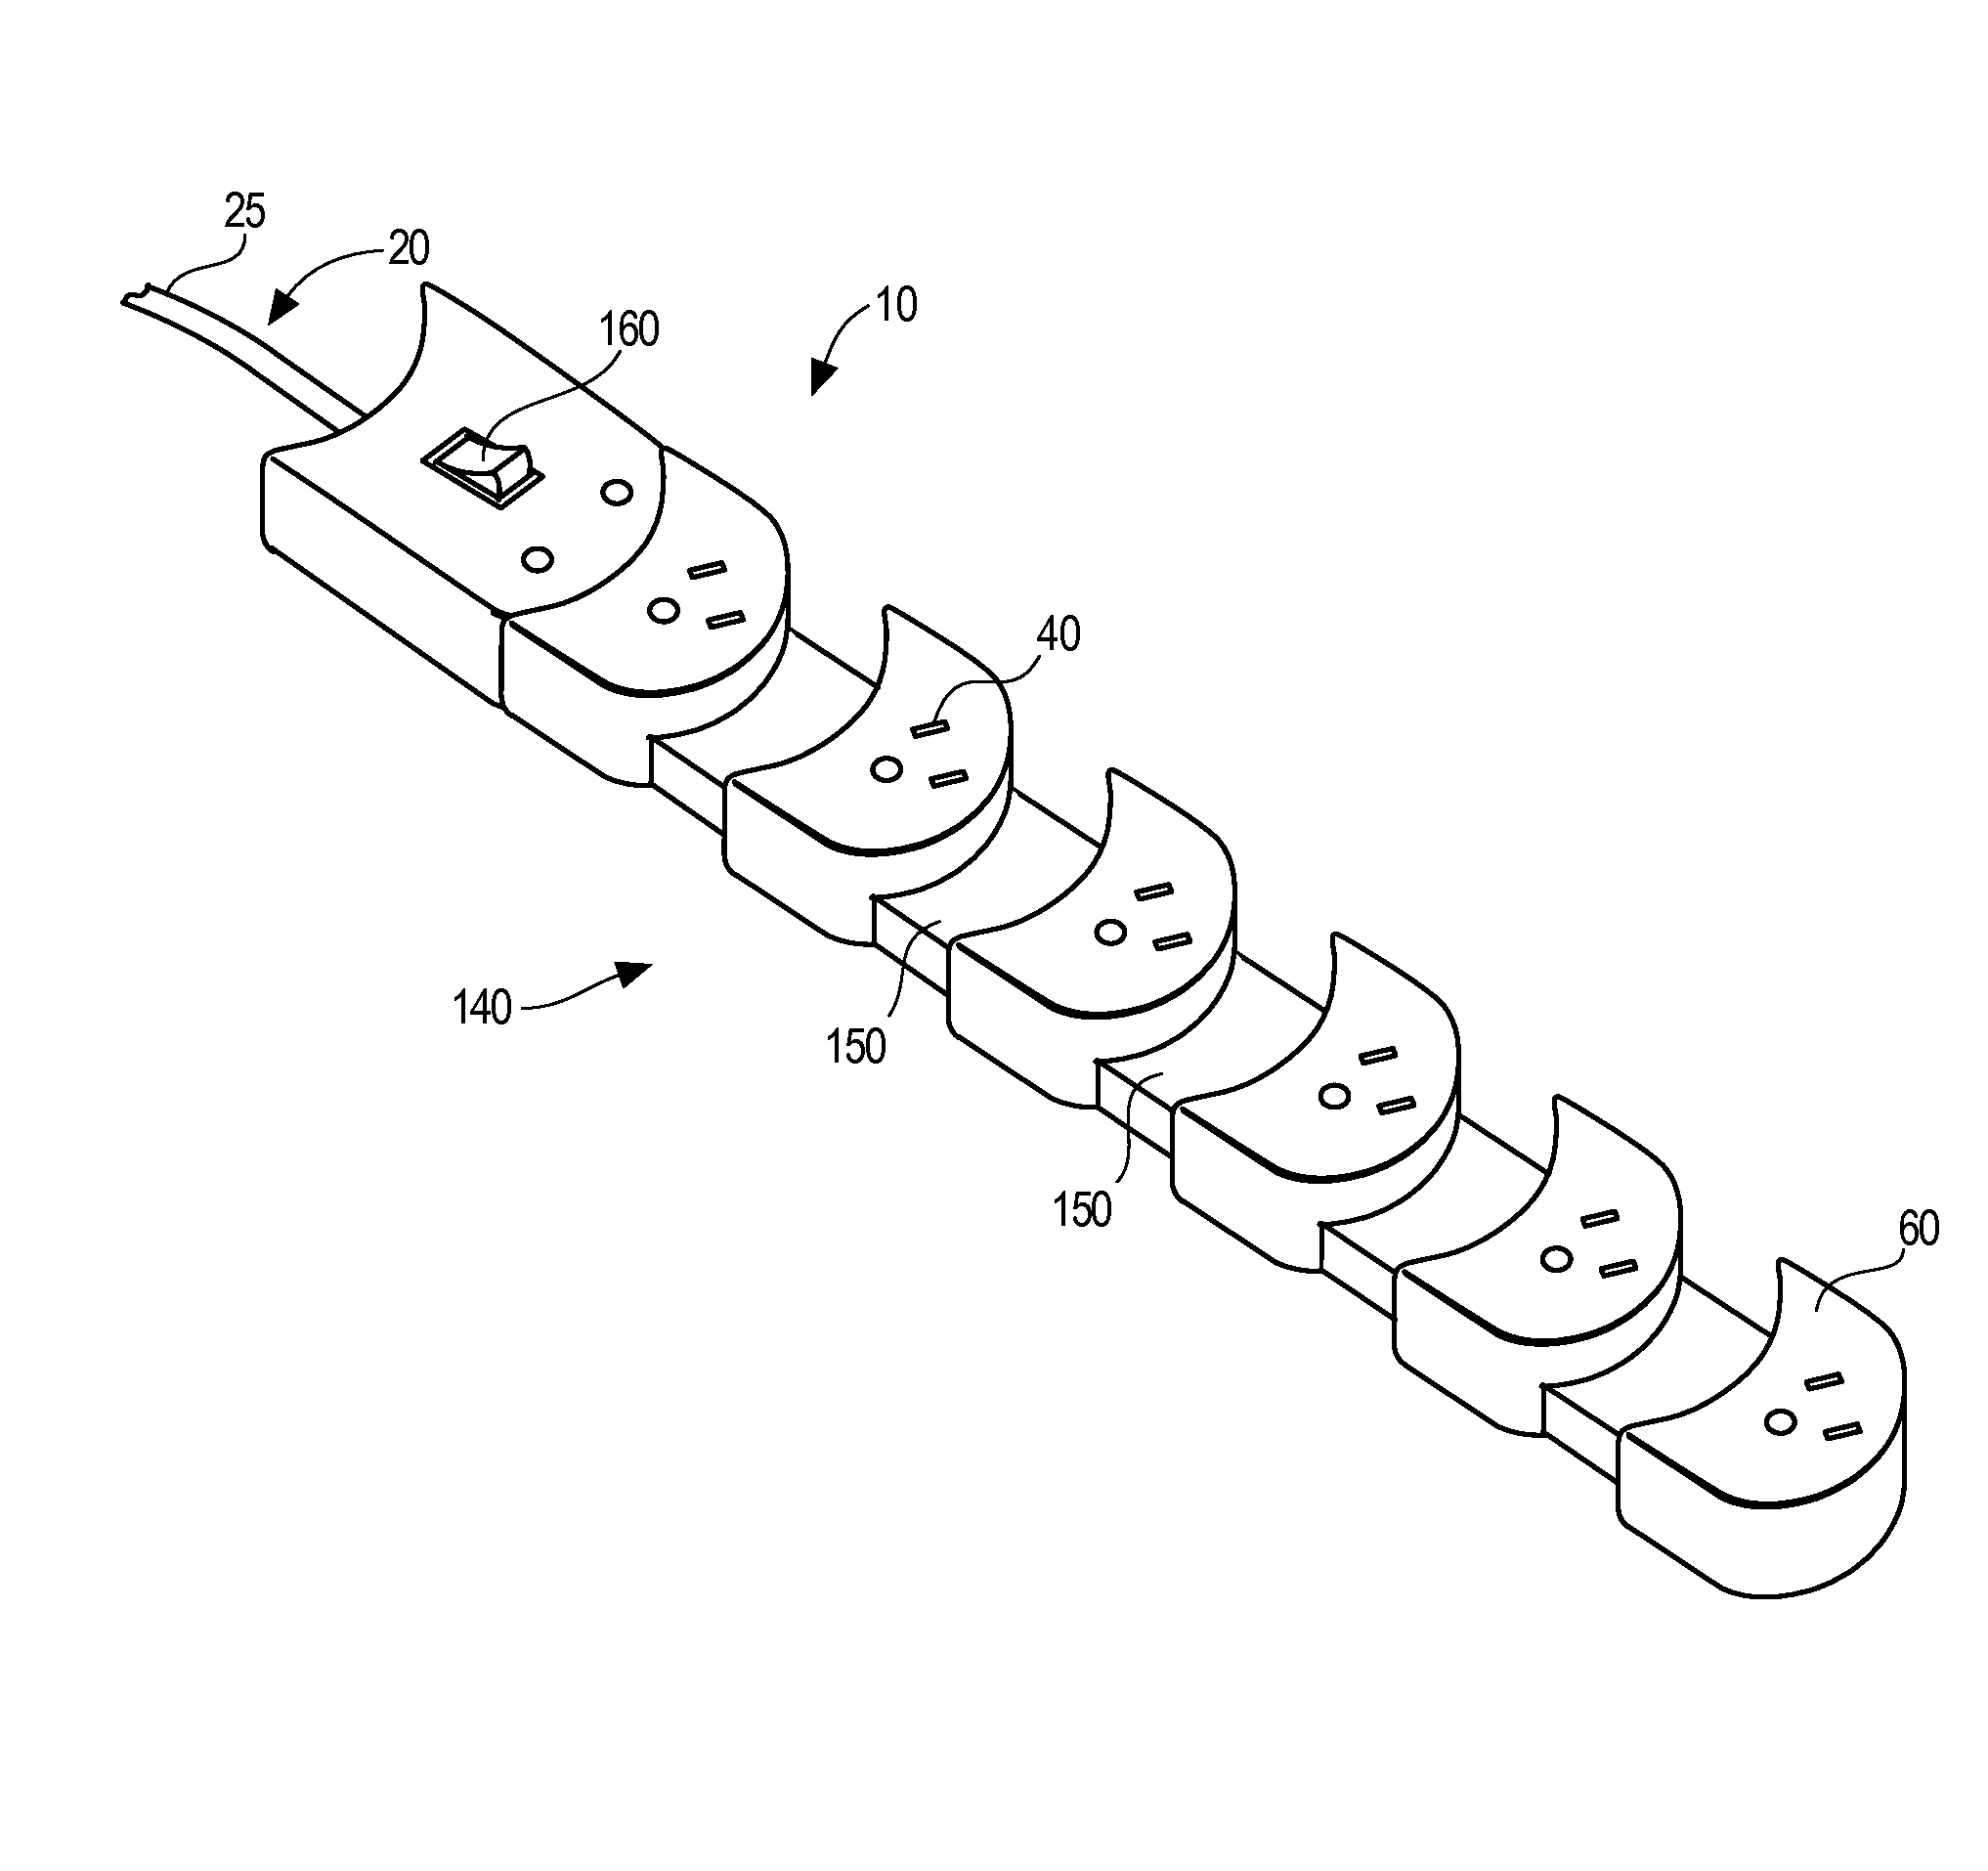 Expanding space saving electrical power connection device